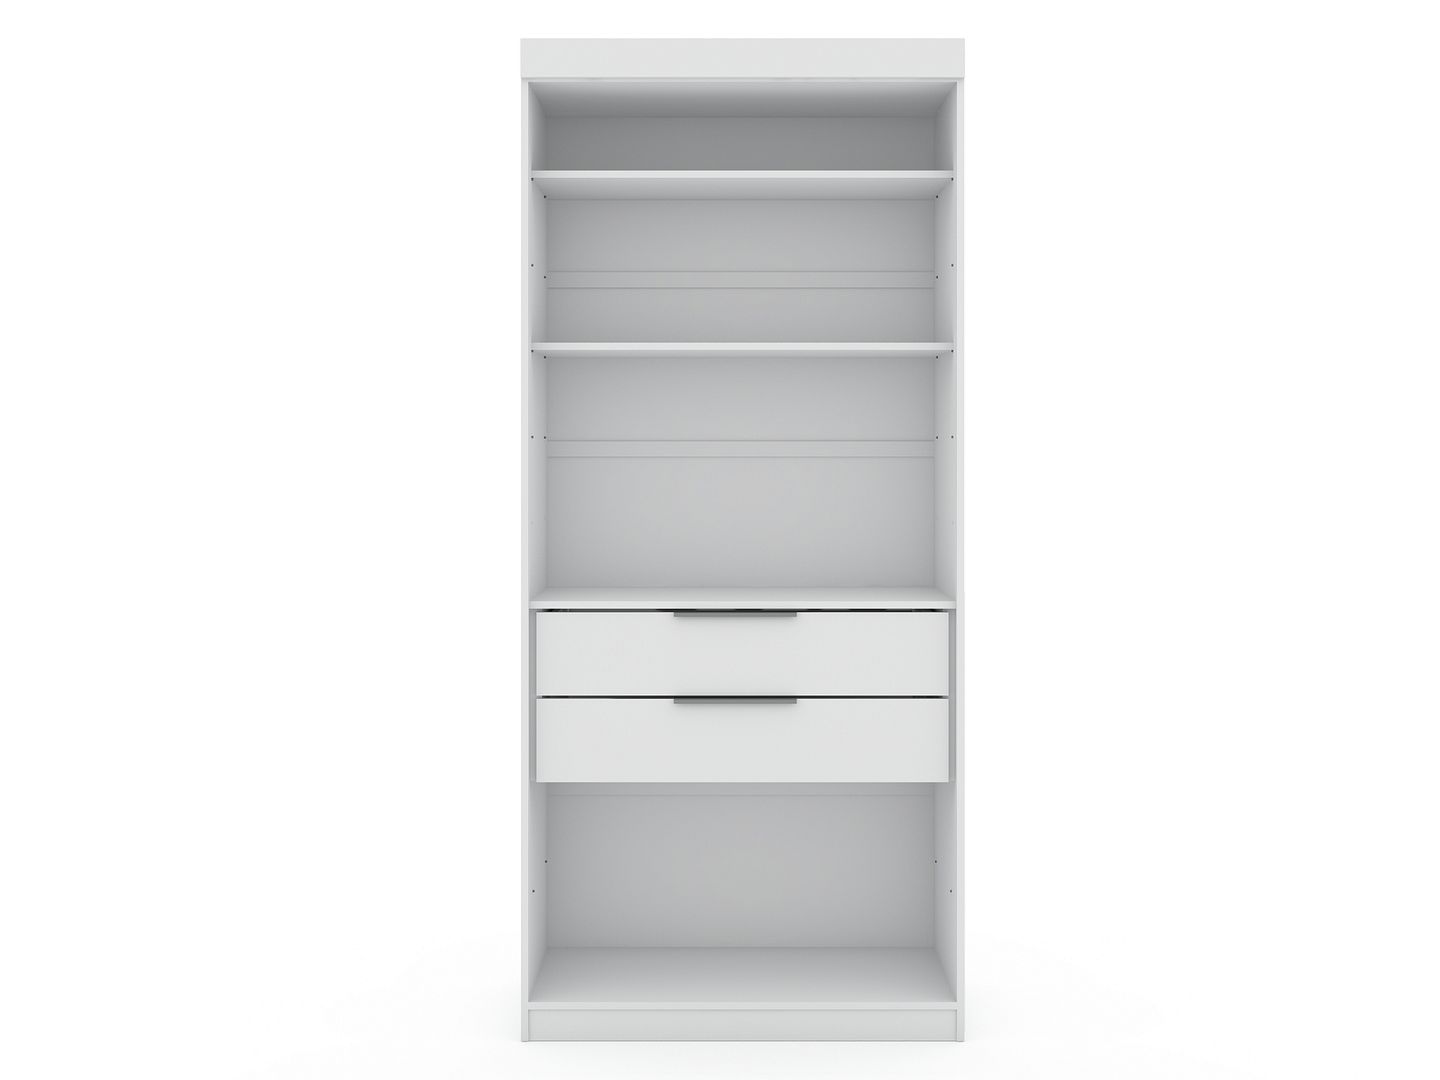 Mulberry Open 1.0 Sectional Closet